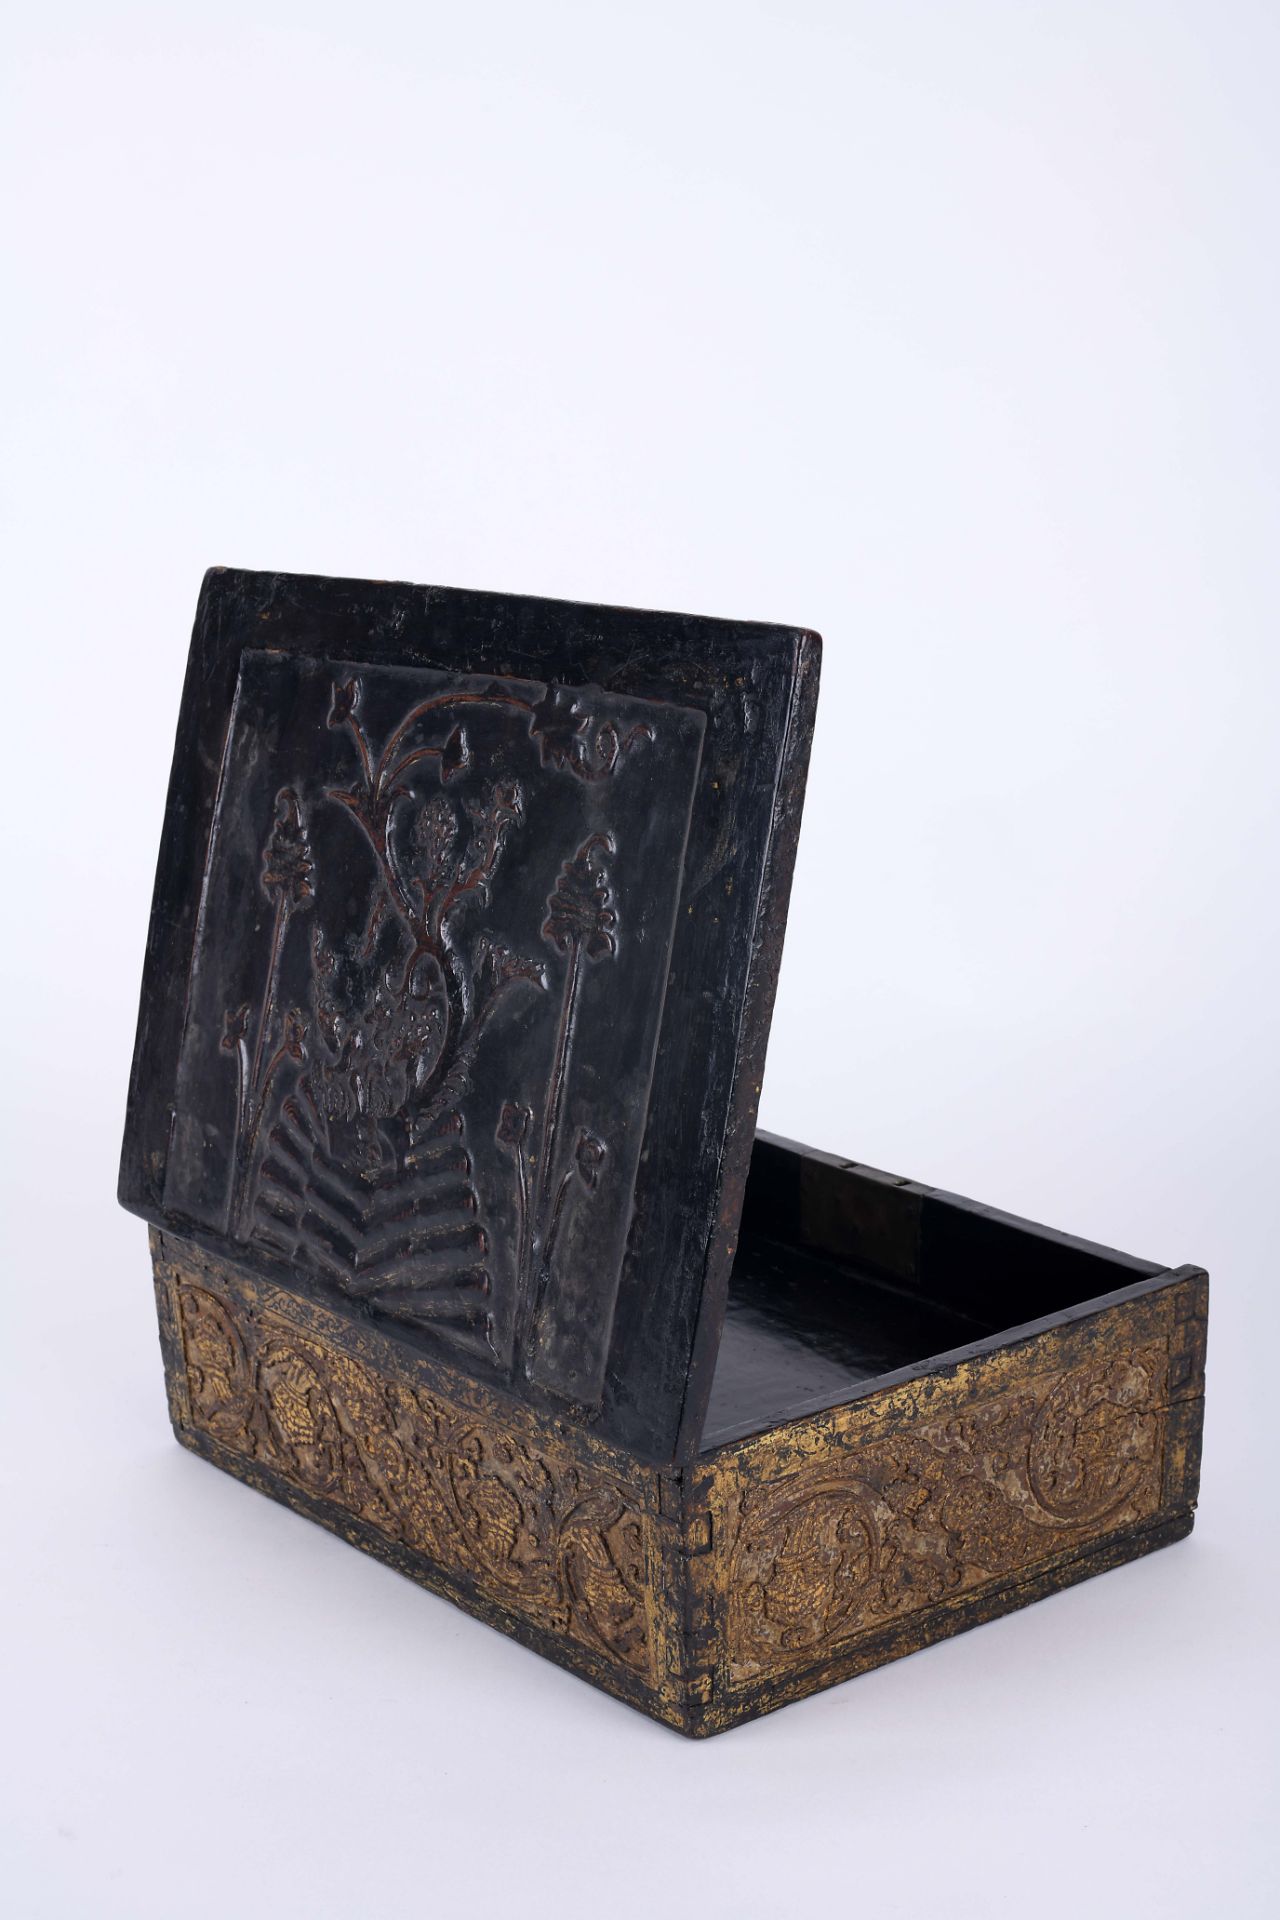 A box with drawer - Image 8 of 12